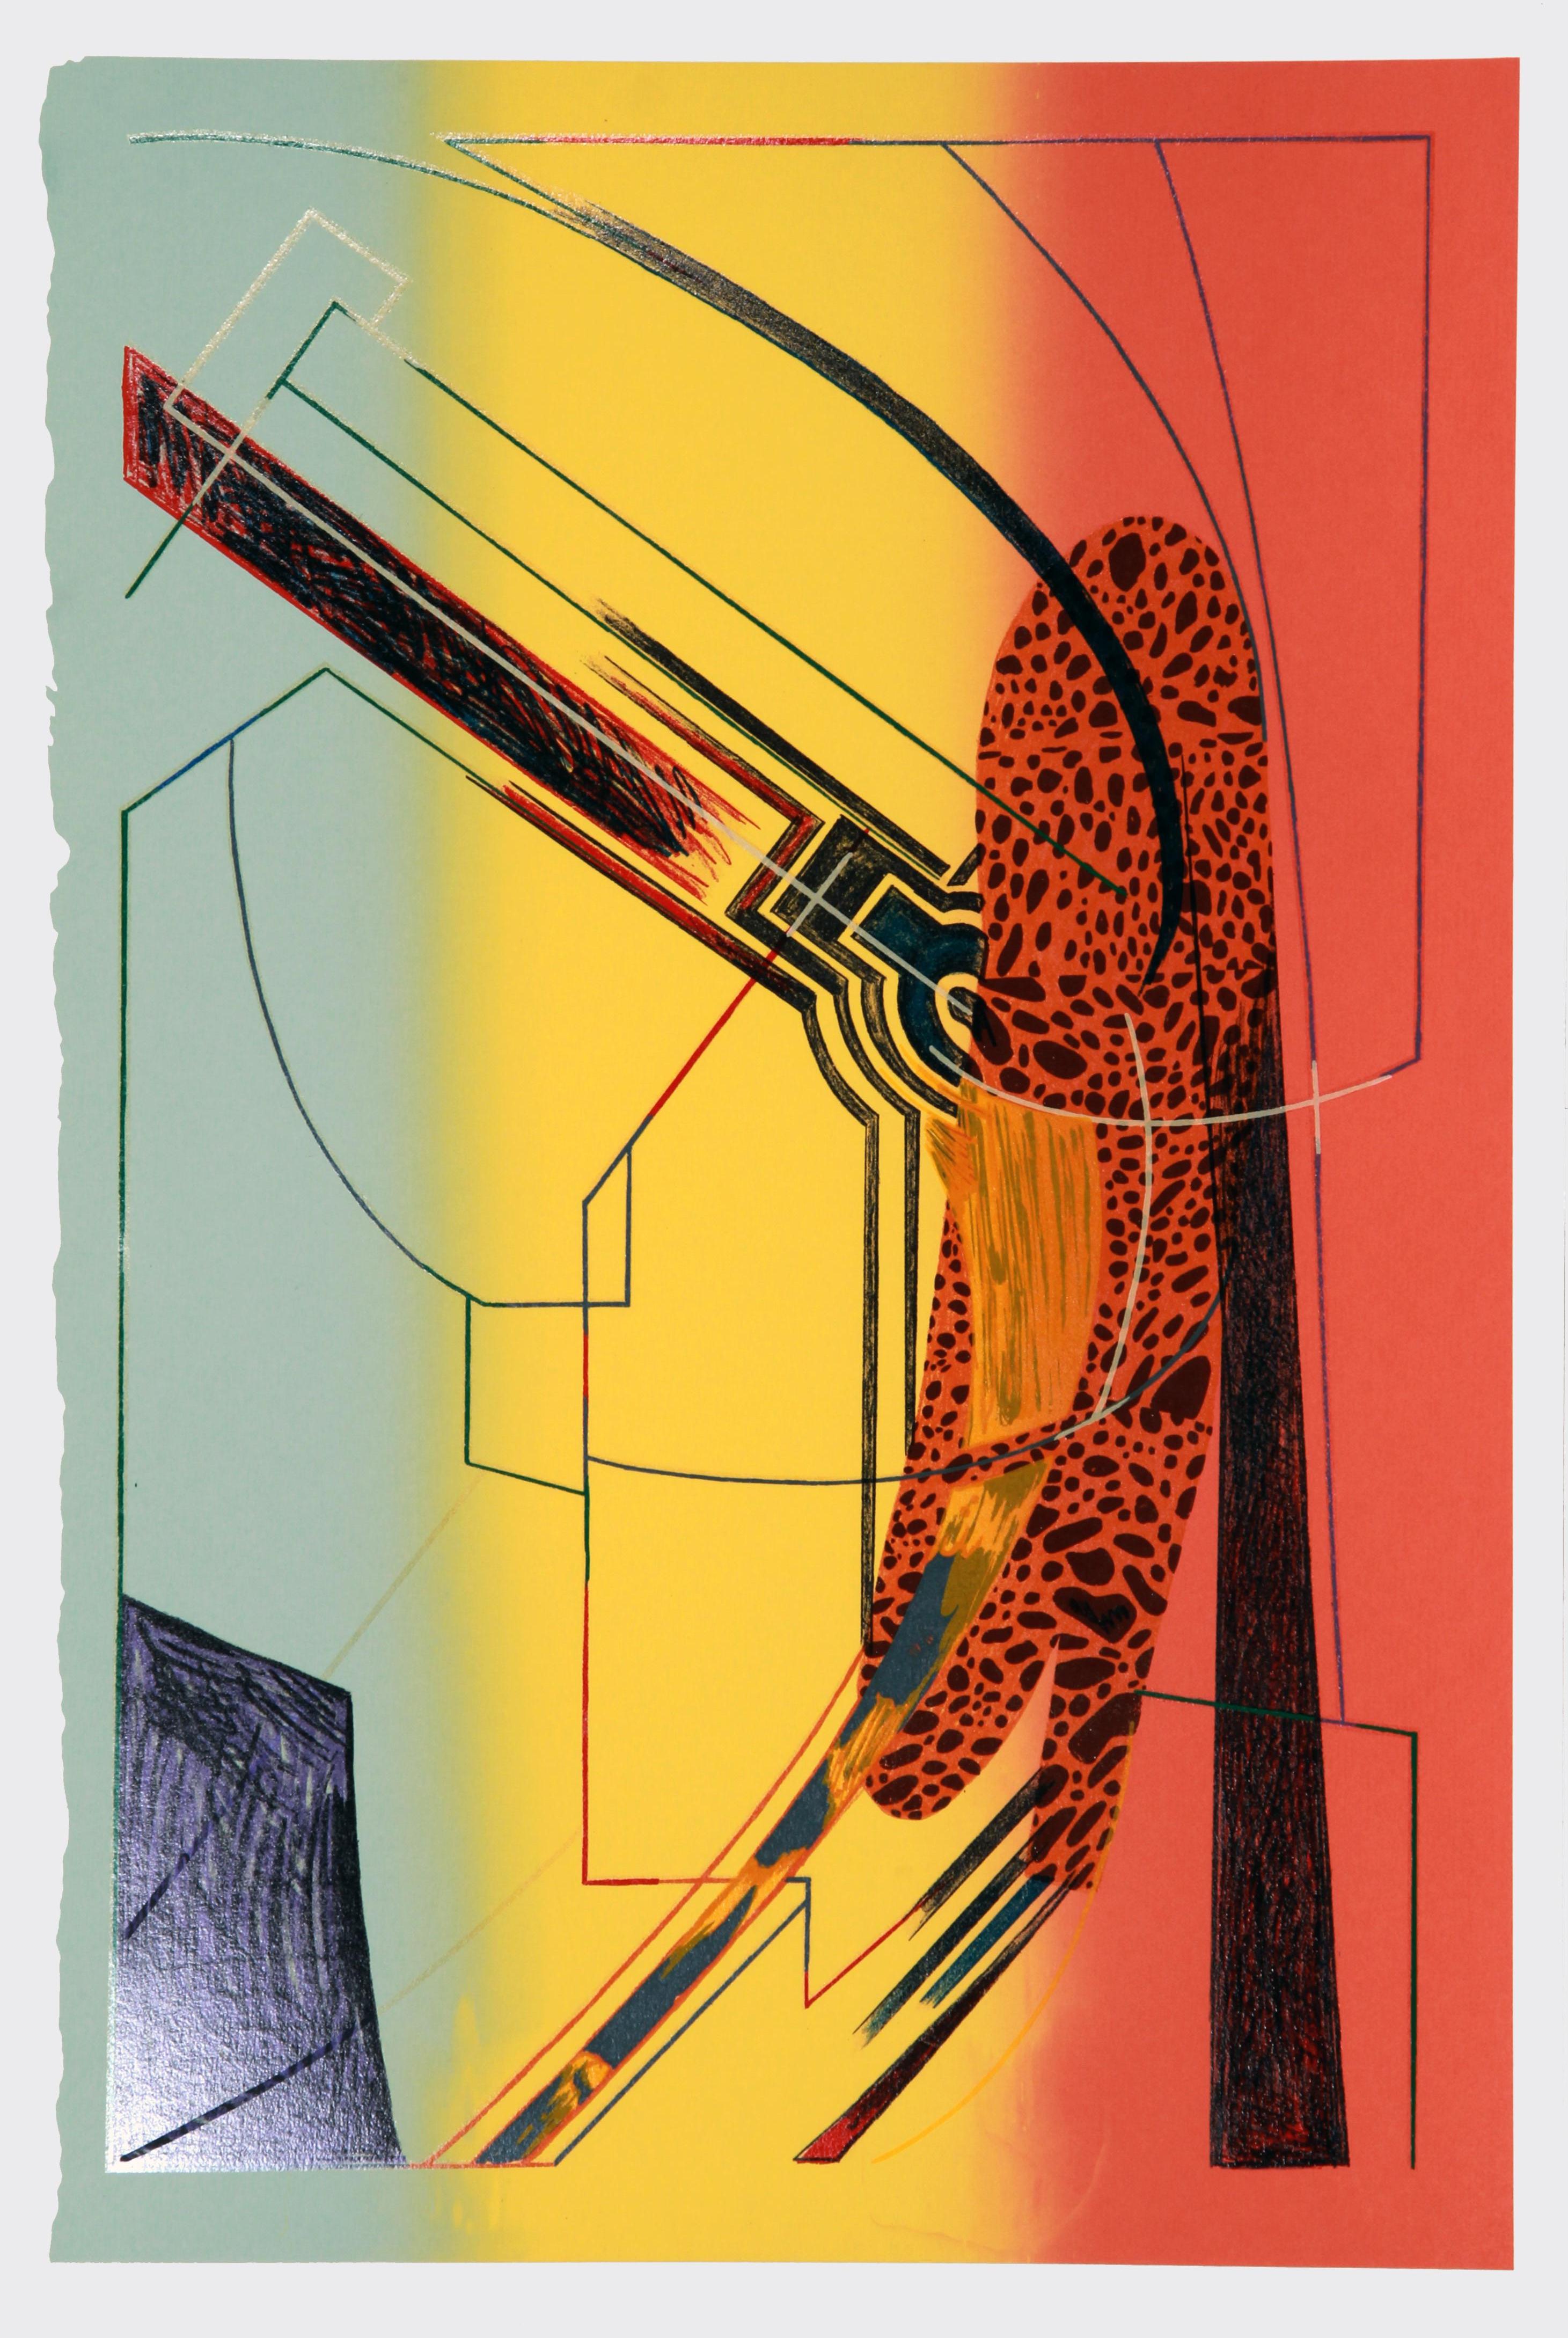 This abstract composition by William Schwedler includes several geometric forms and shapes that are placed alongside straight, angled lines.

Head Start
Artist:  William Schwedler, American (1942 - 1982)
Date: 1979
Screenprint, signed and numbered